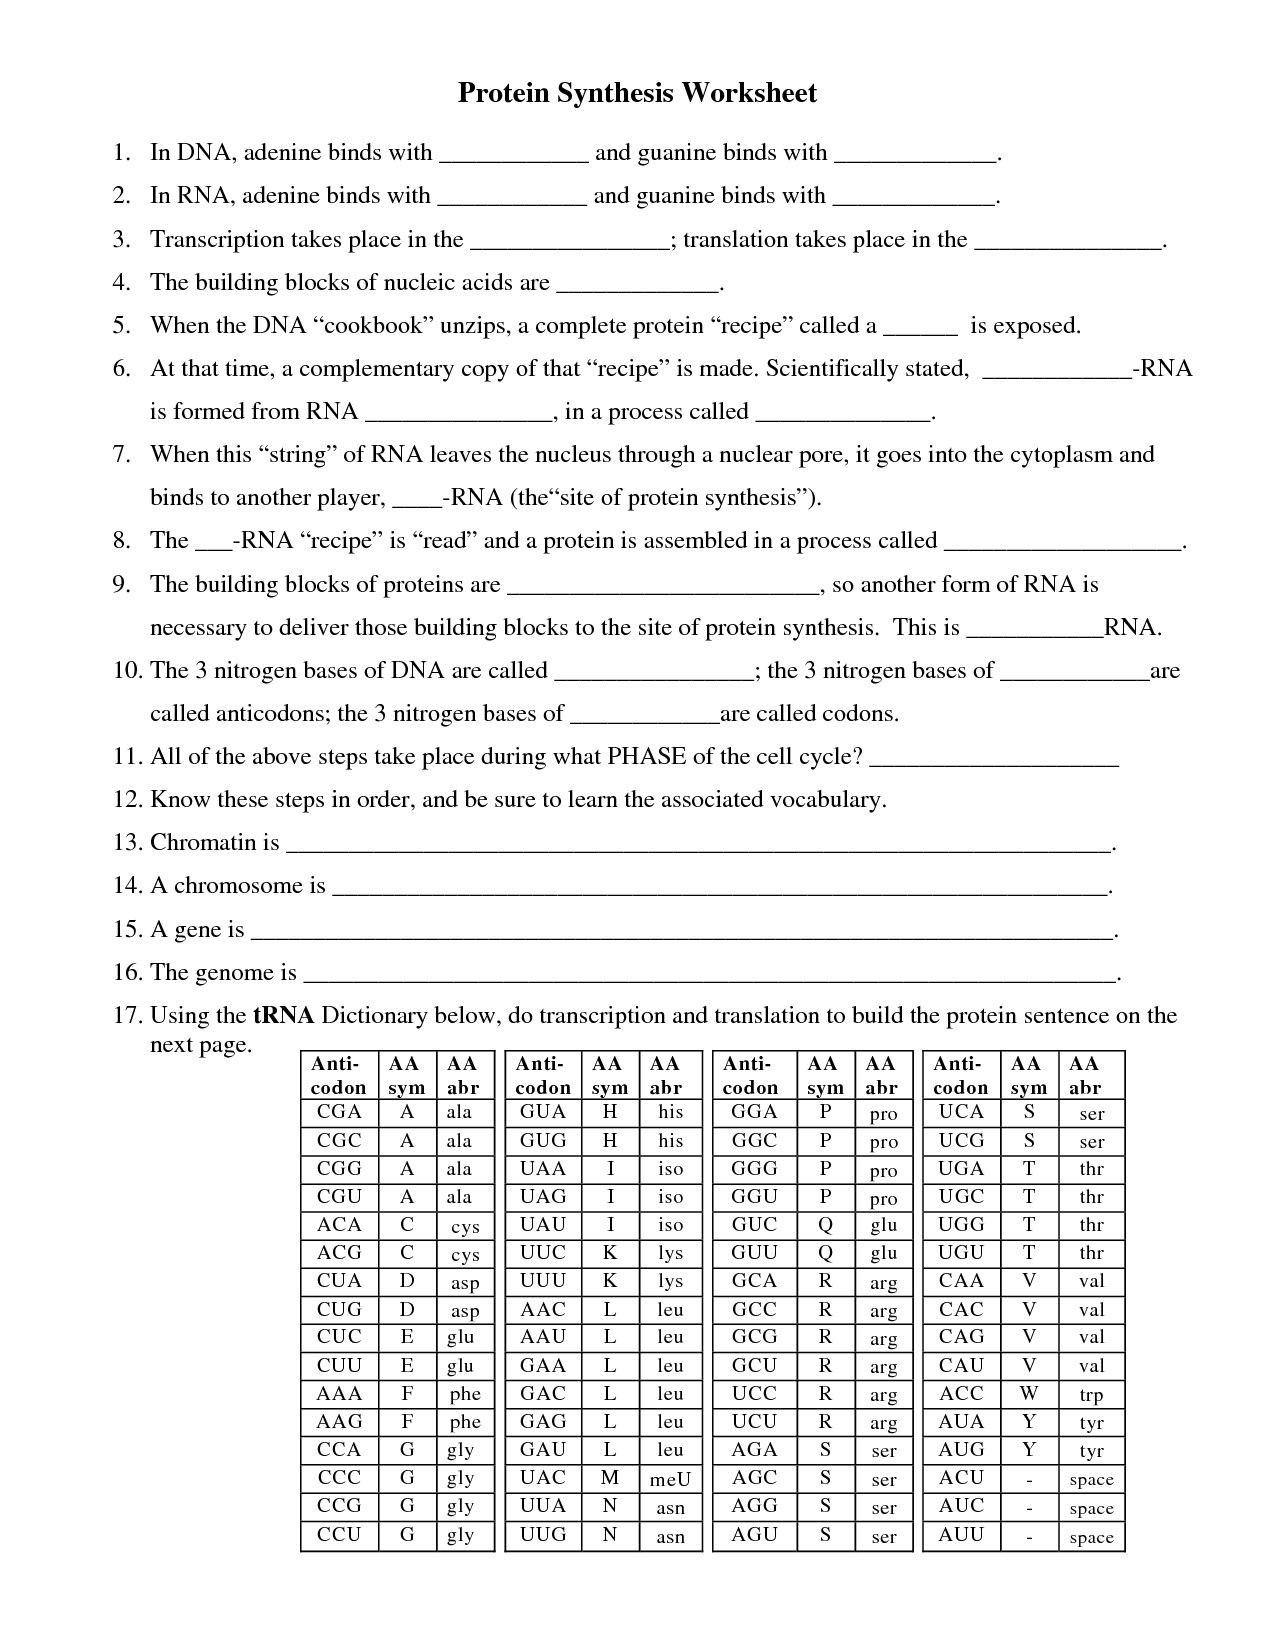 Dna Mutations Practice Worksheet Answer Prime Dna and Protein Synthesis Worksheet Answers